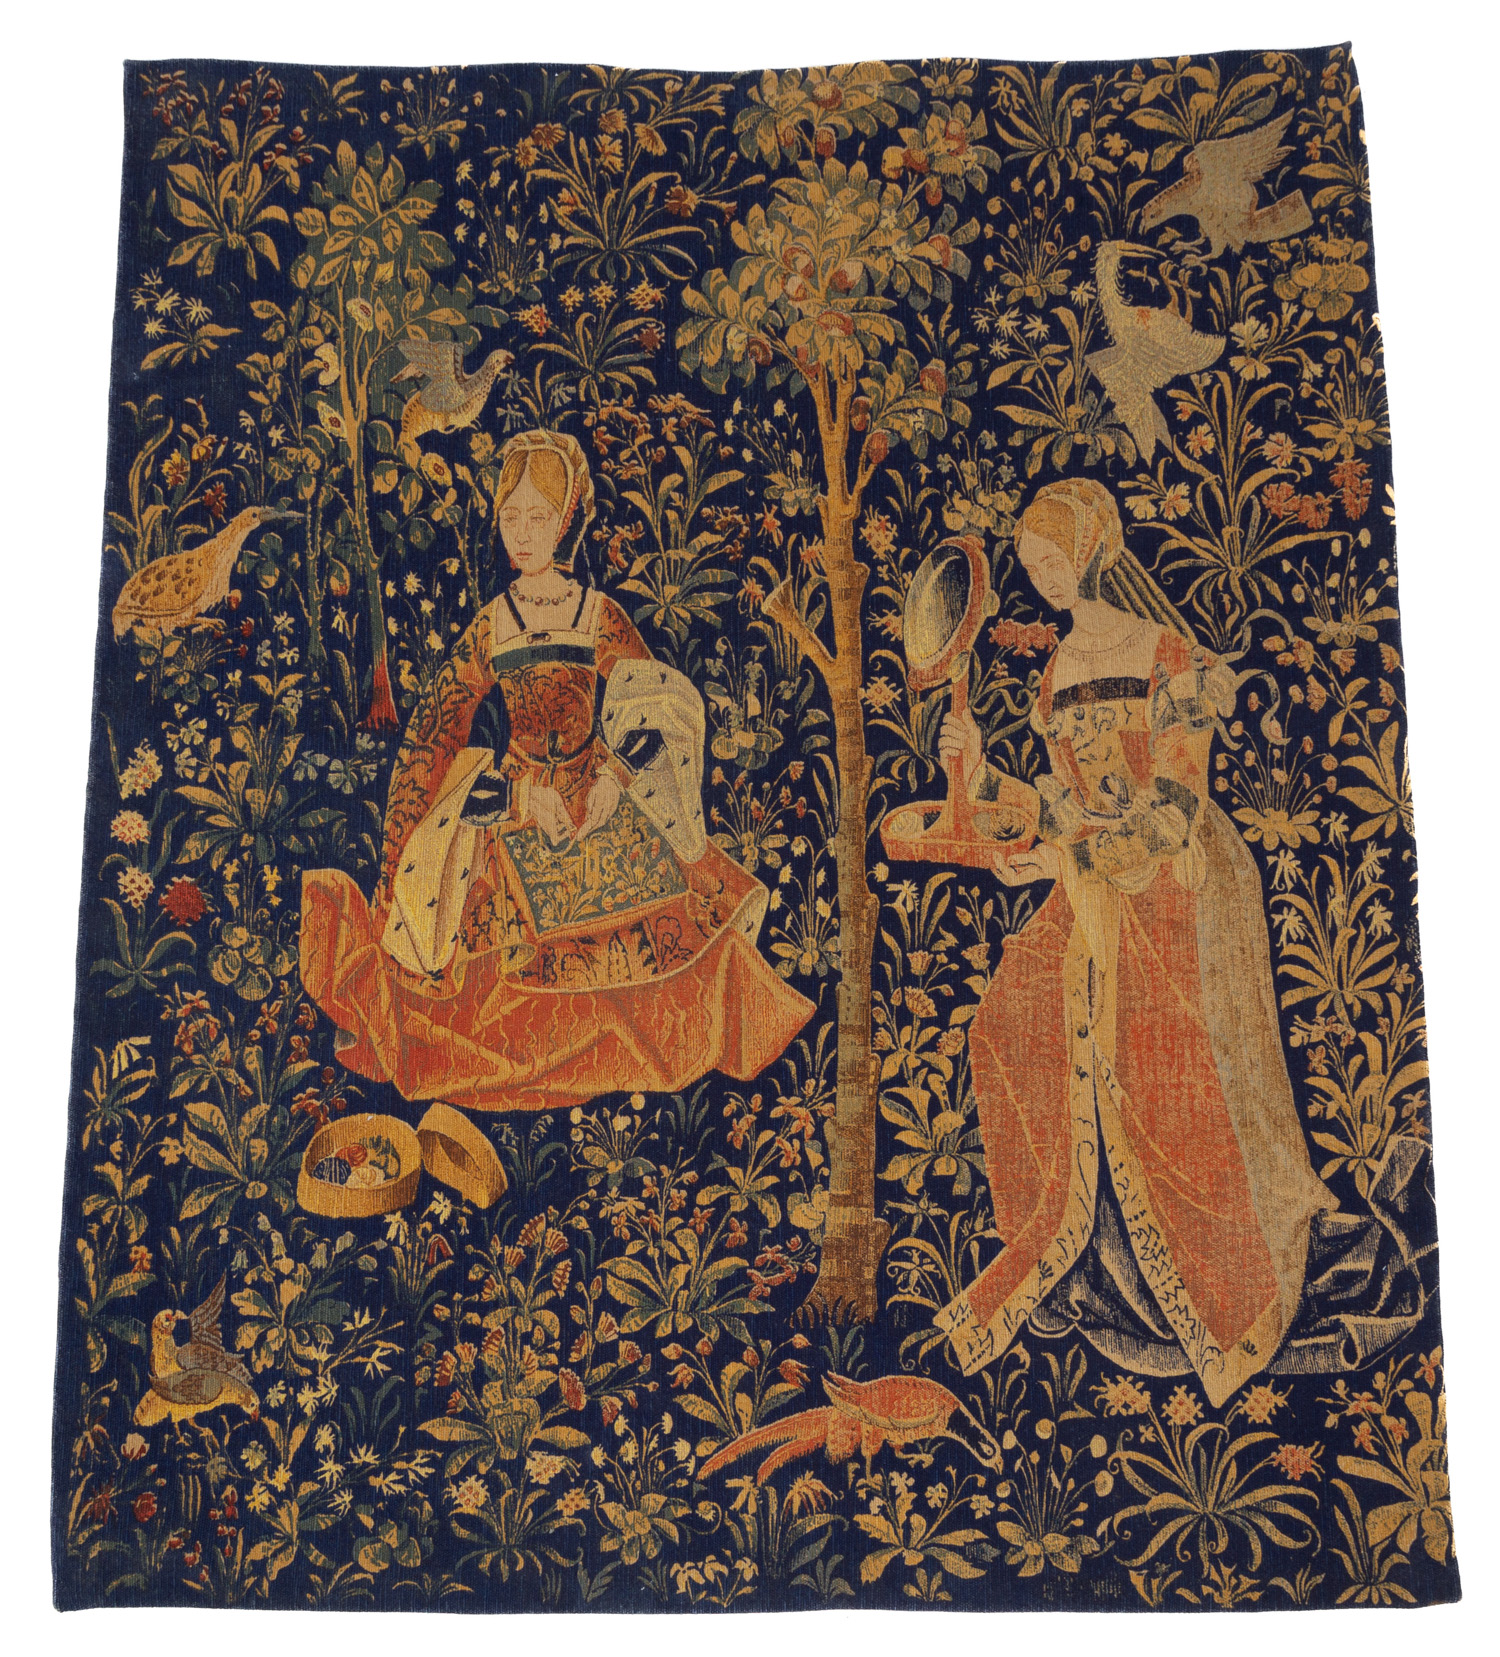 MEDIEVAL STYLE TAPESTRY Screen